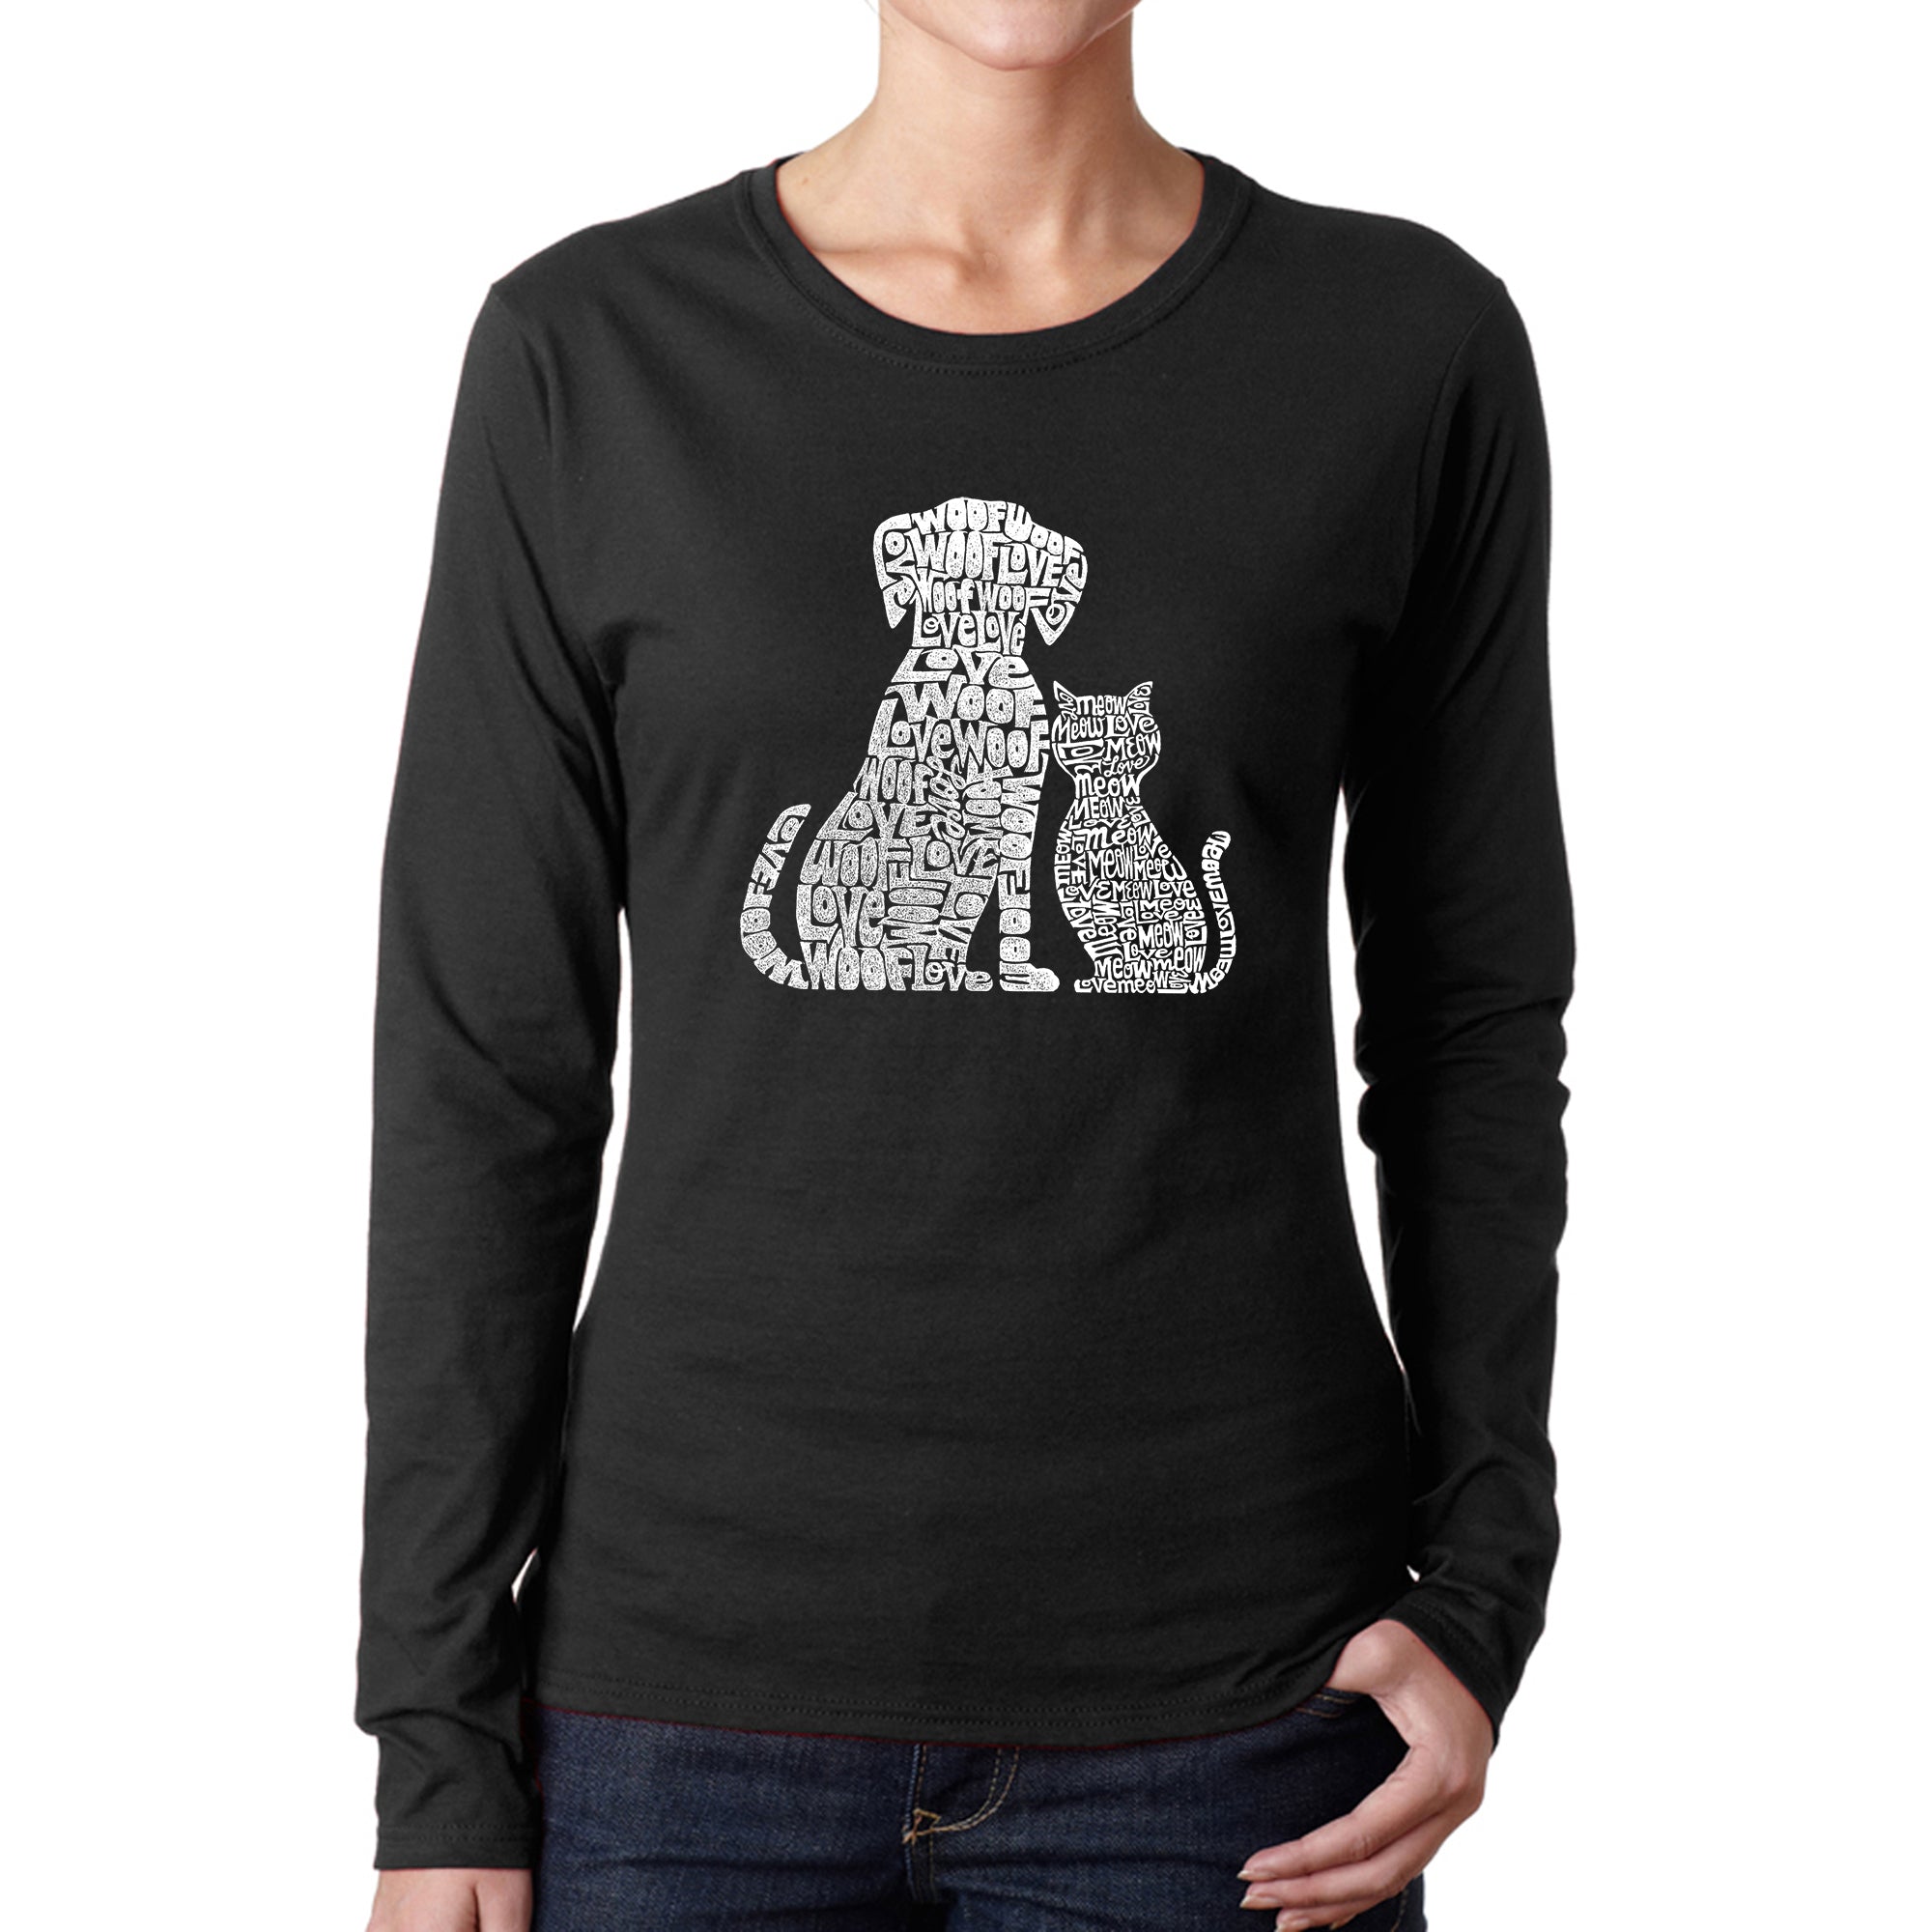 Dogs And Cats - Women's Word Art Long Sleeve T-Shirt - Black - XX-Large